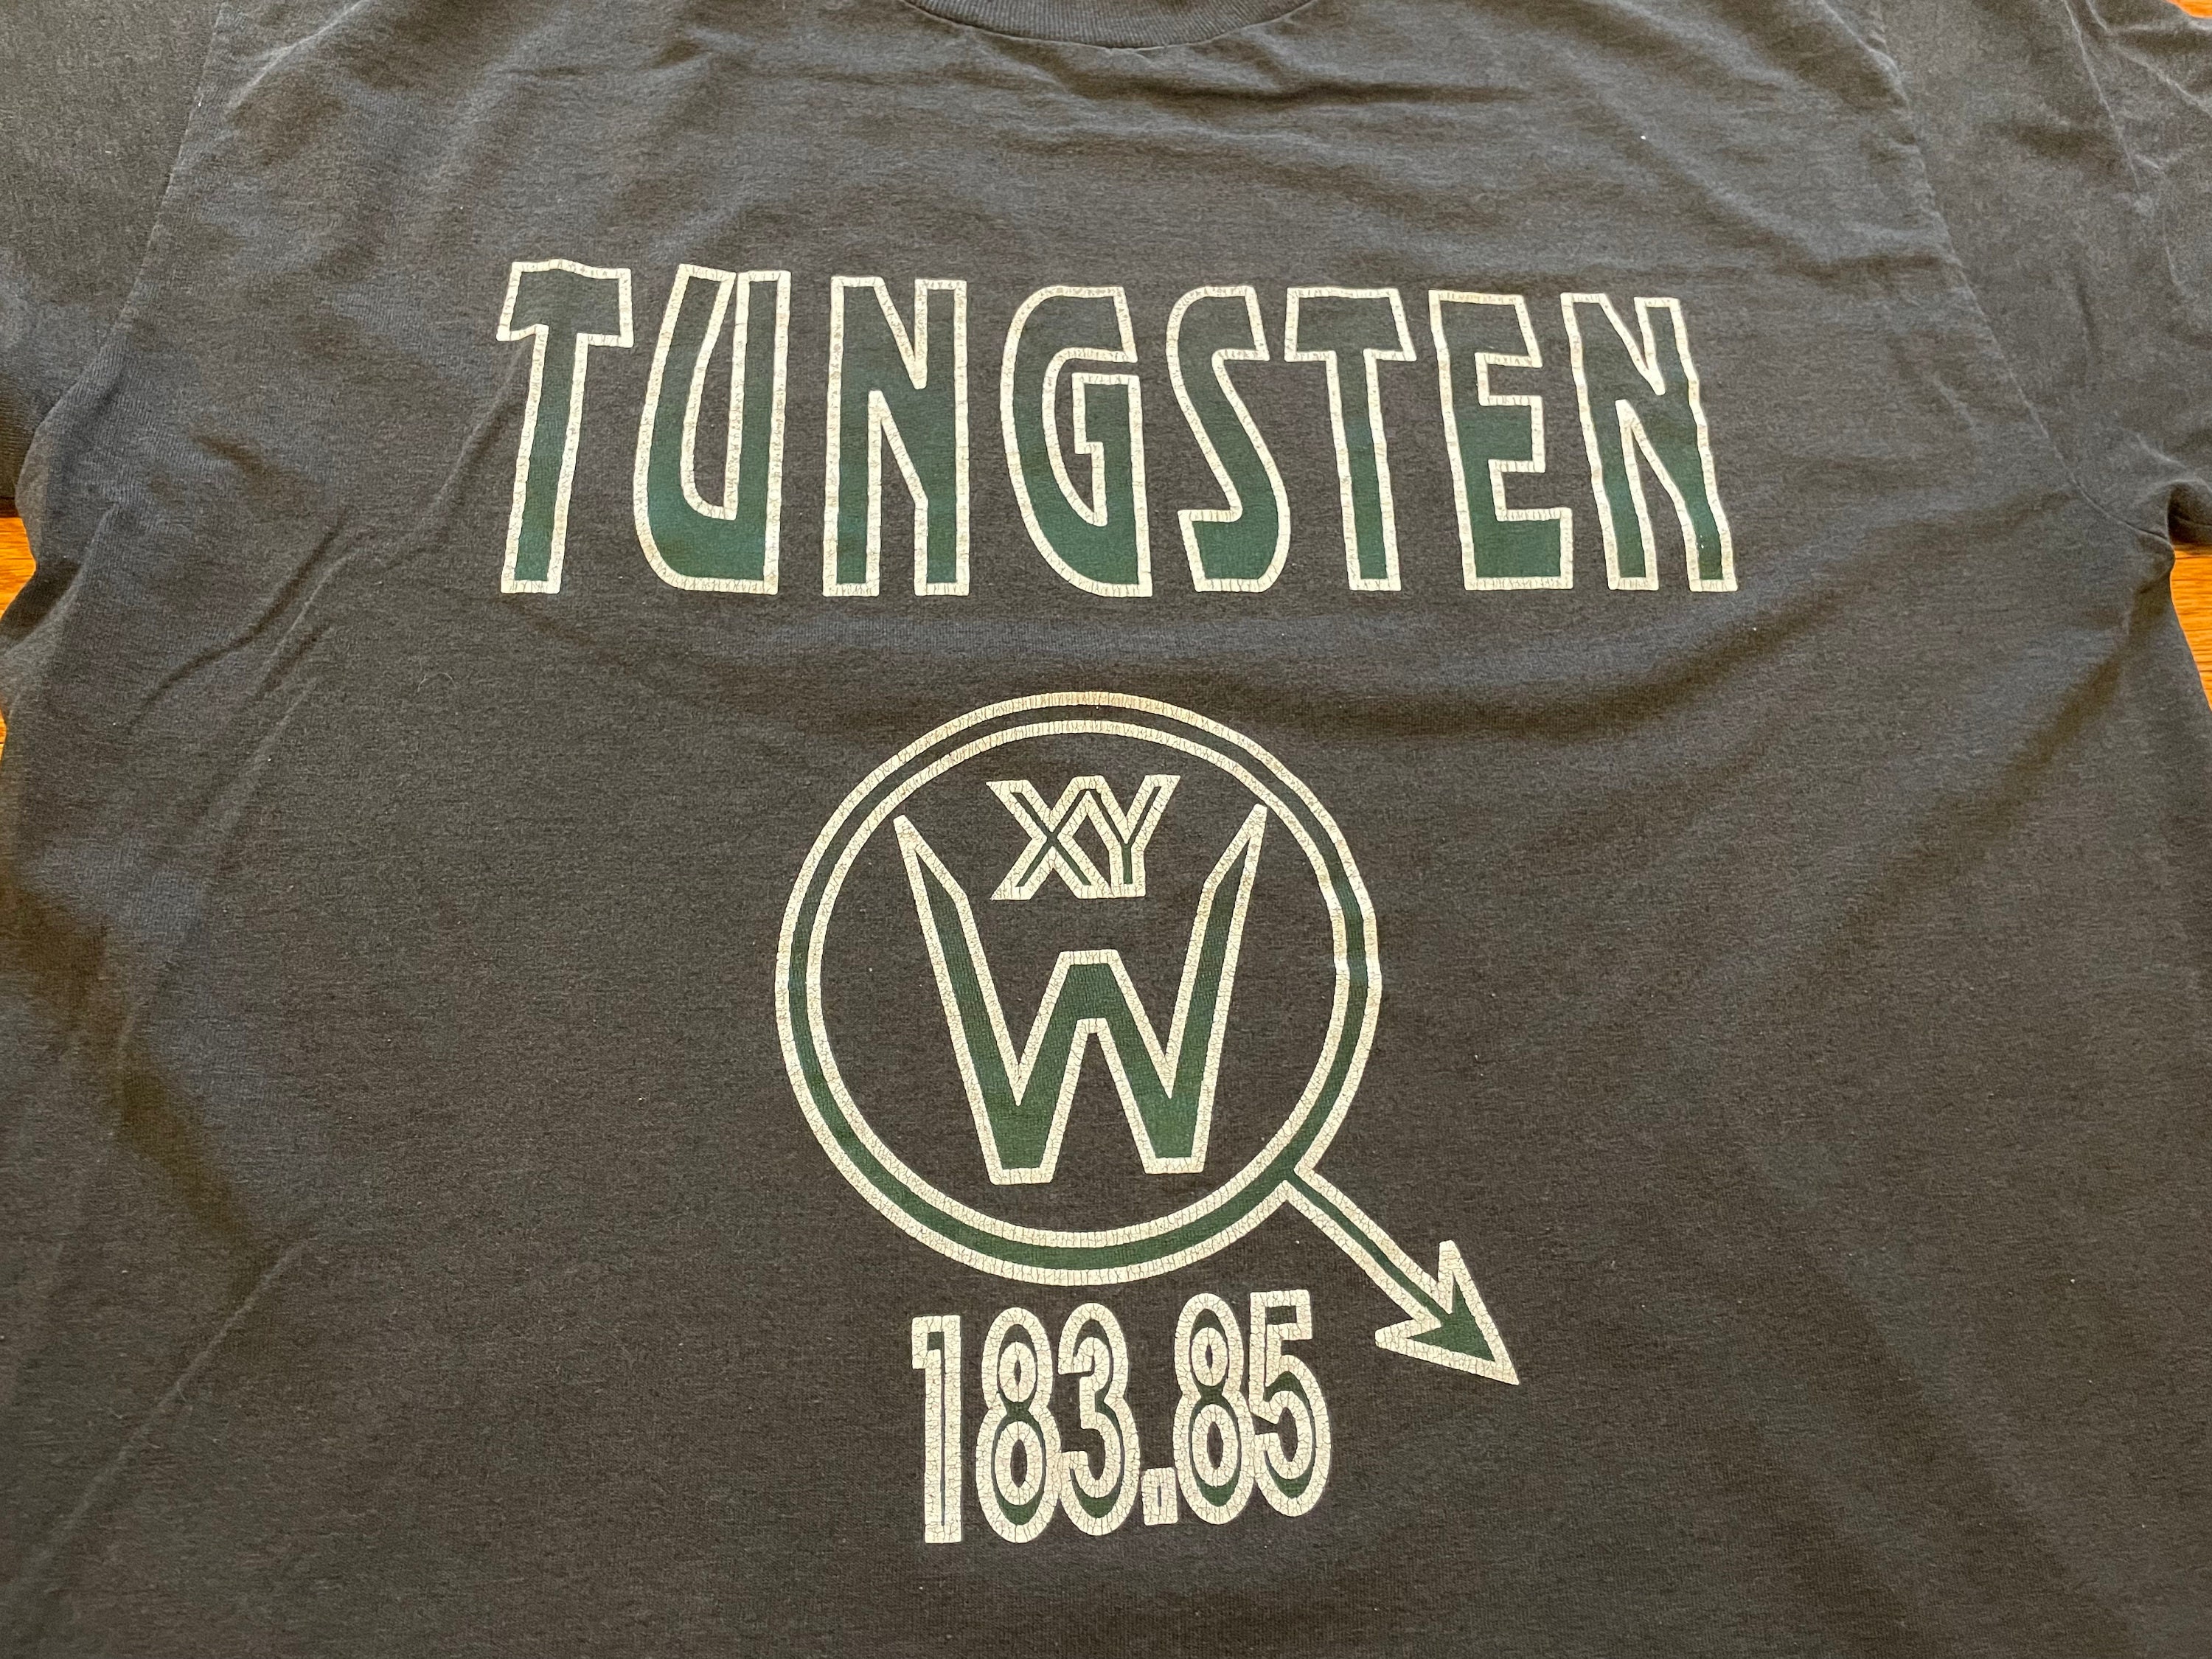 1993 90S Tungsten Vintage Band T Shirt Extremely Rare Sludge Metal